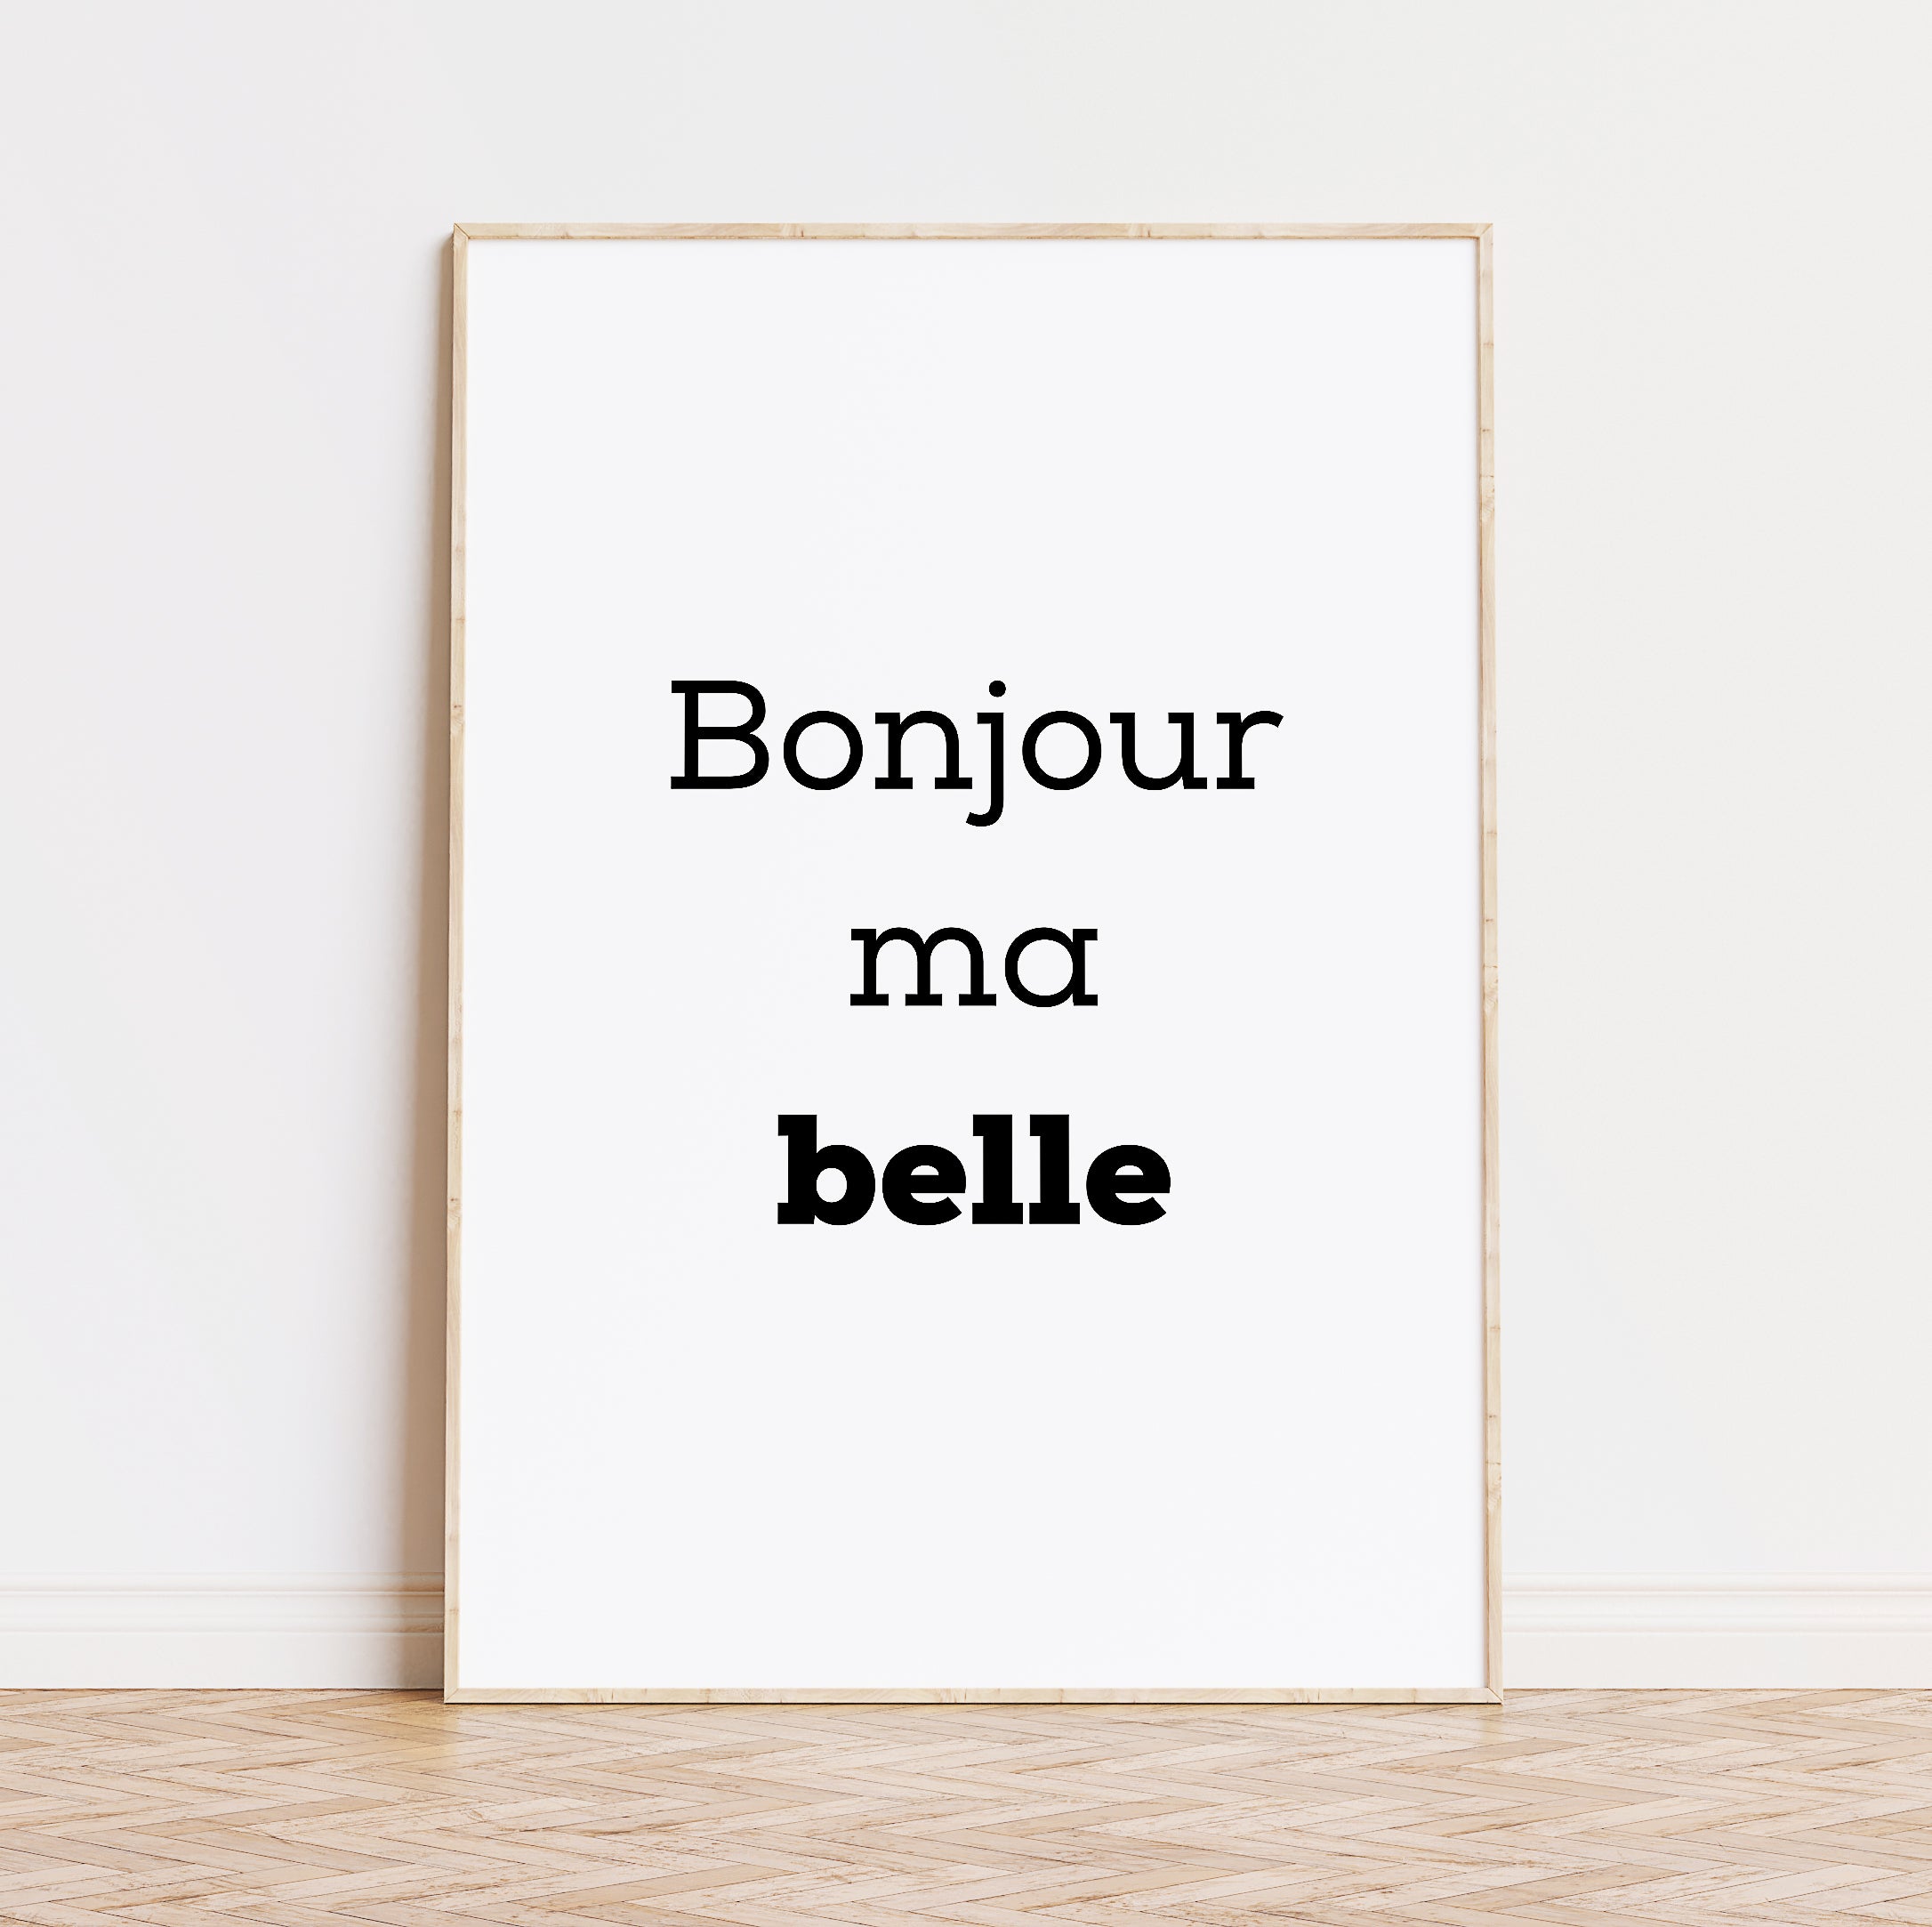 Typographic belle, studio5prints French – ma Poster Print, Bonjour Statement,